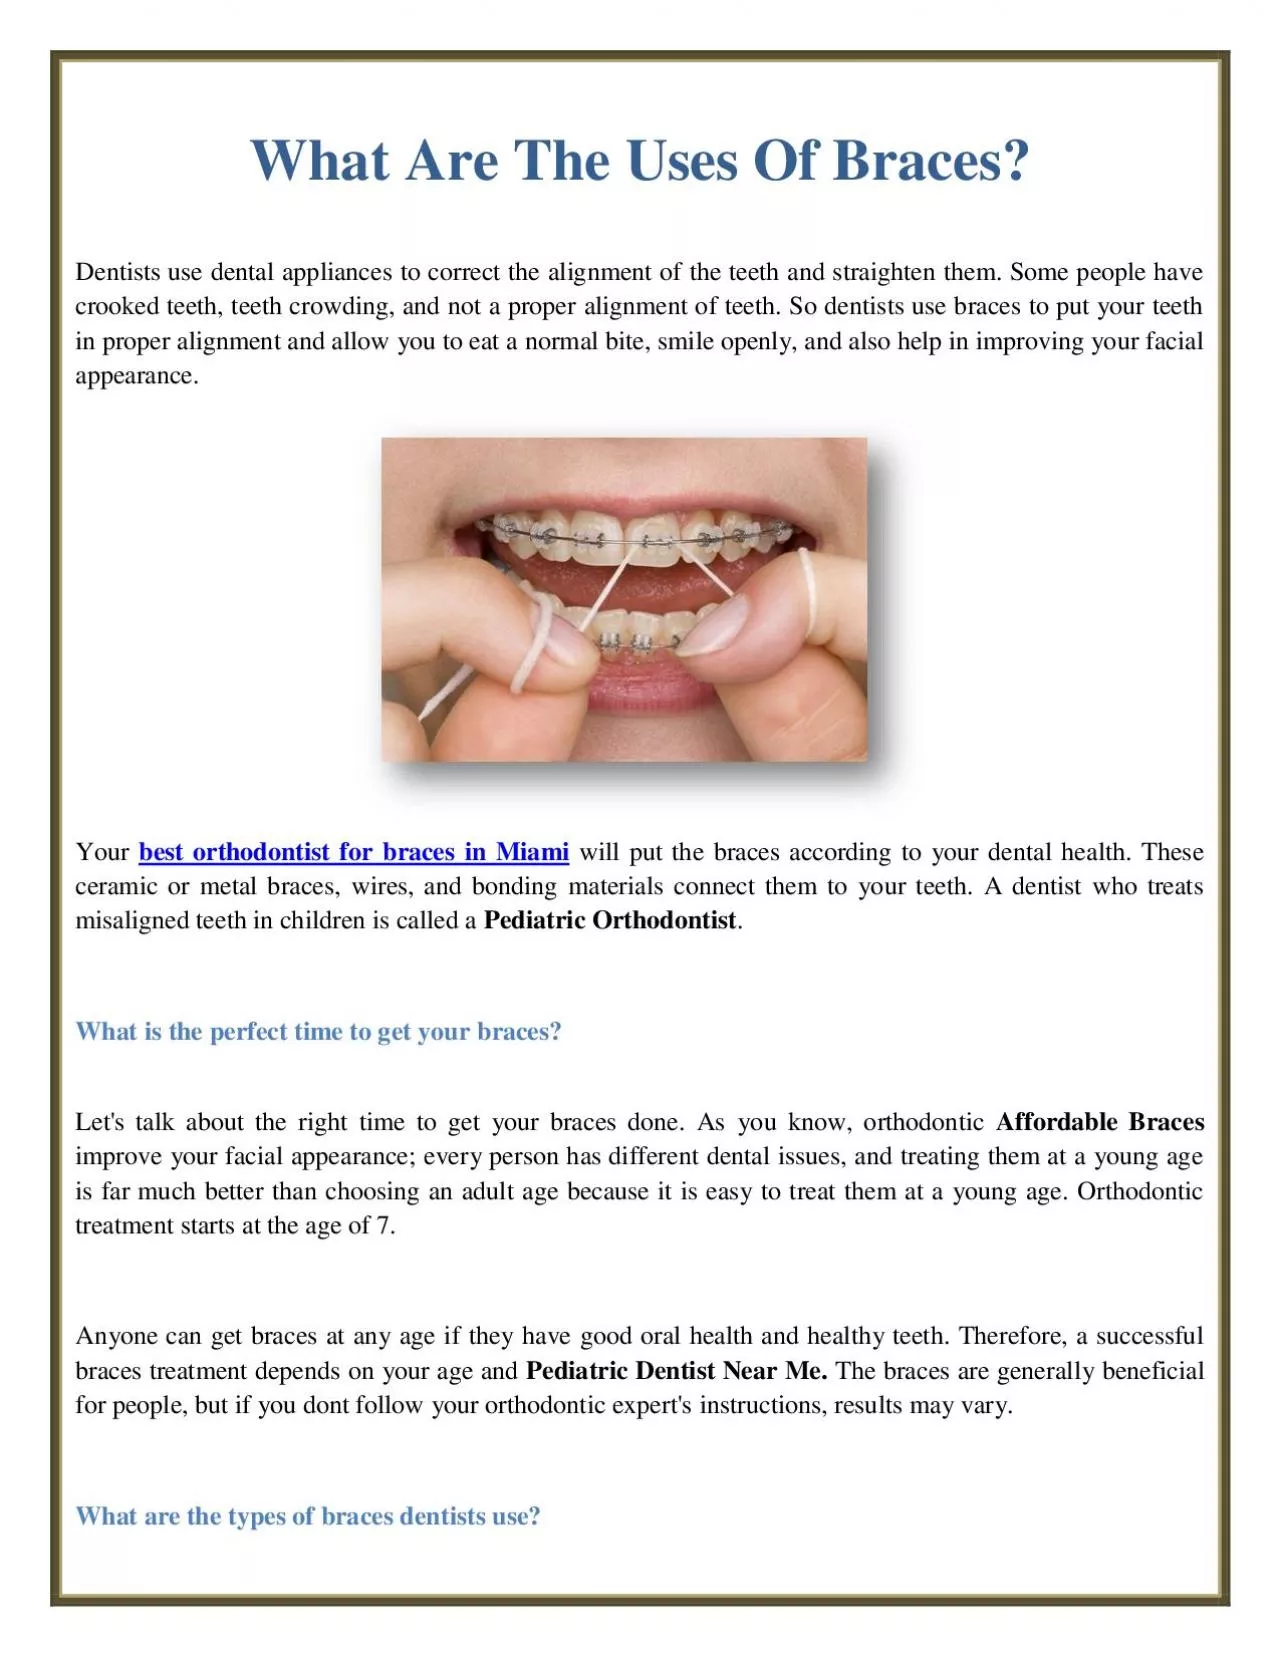 What Are The Uses Of Braces?